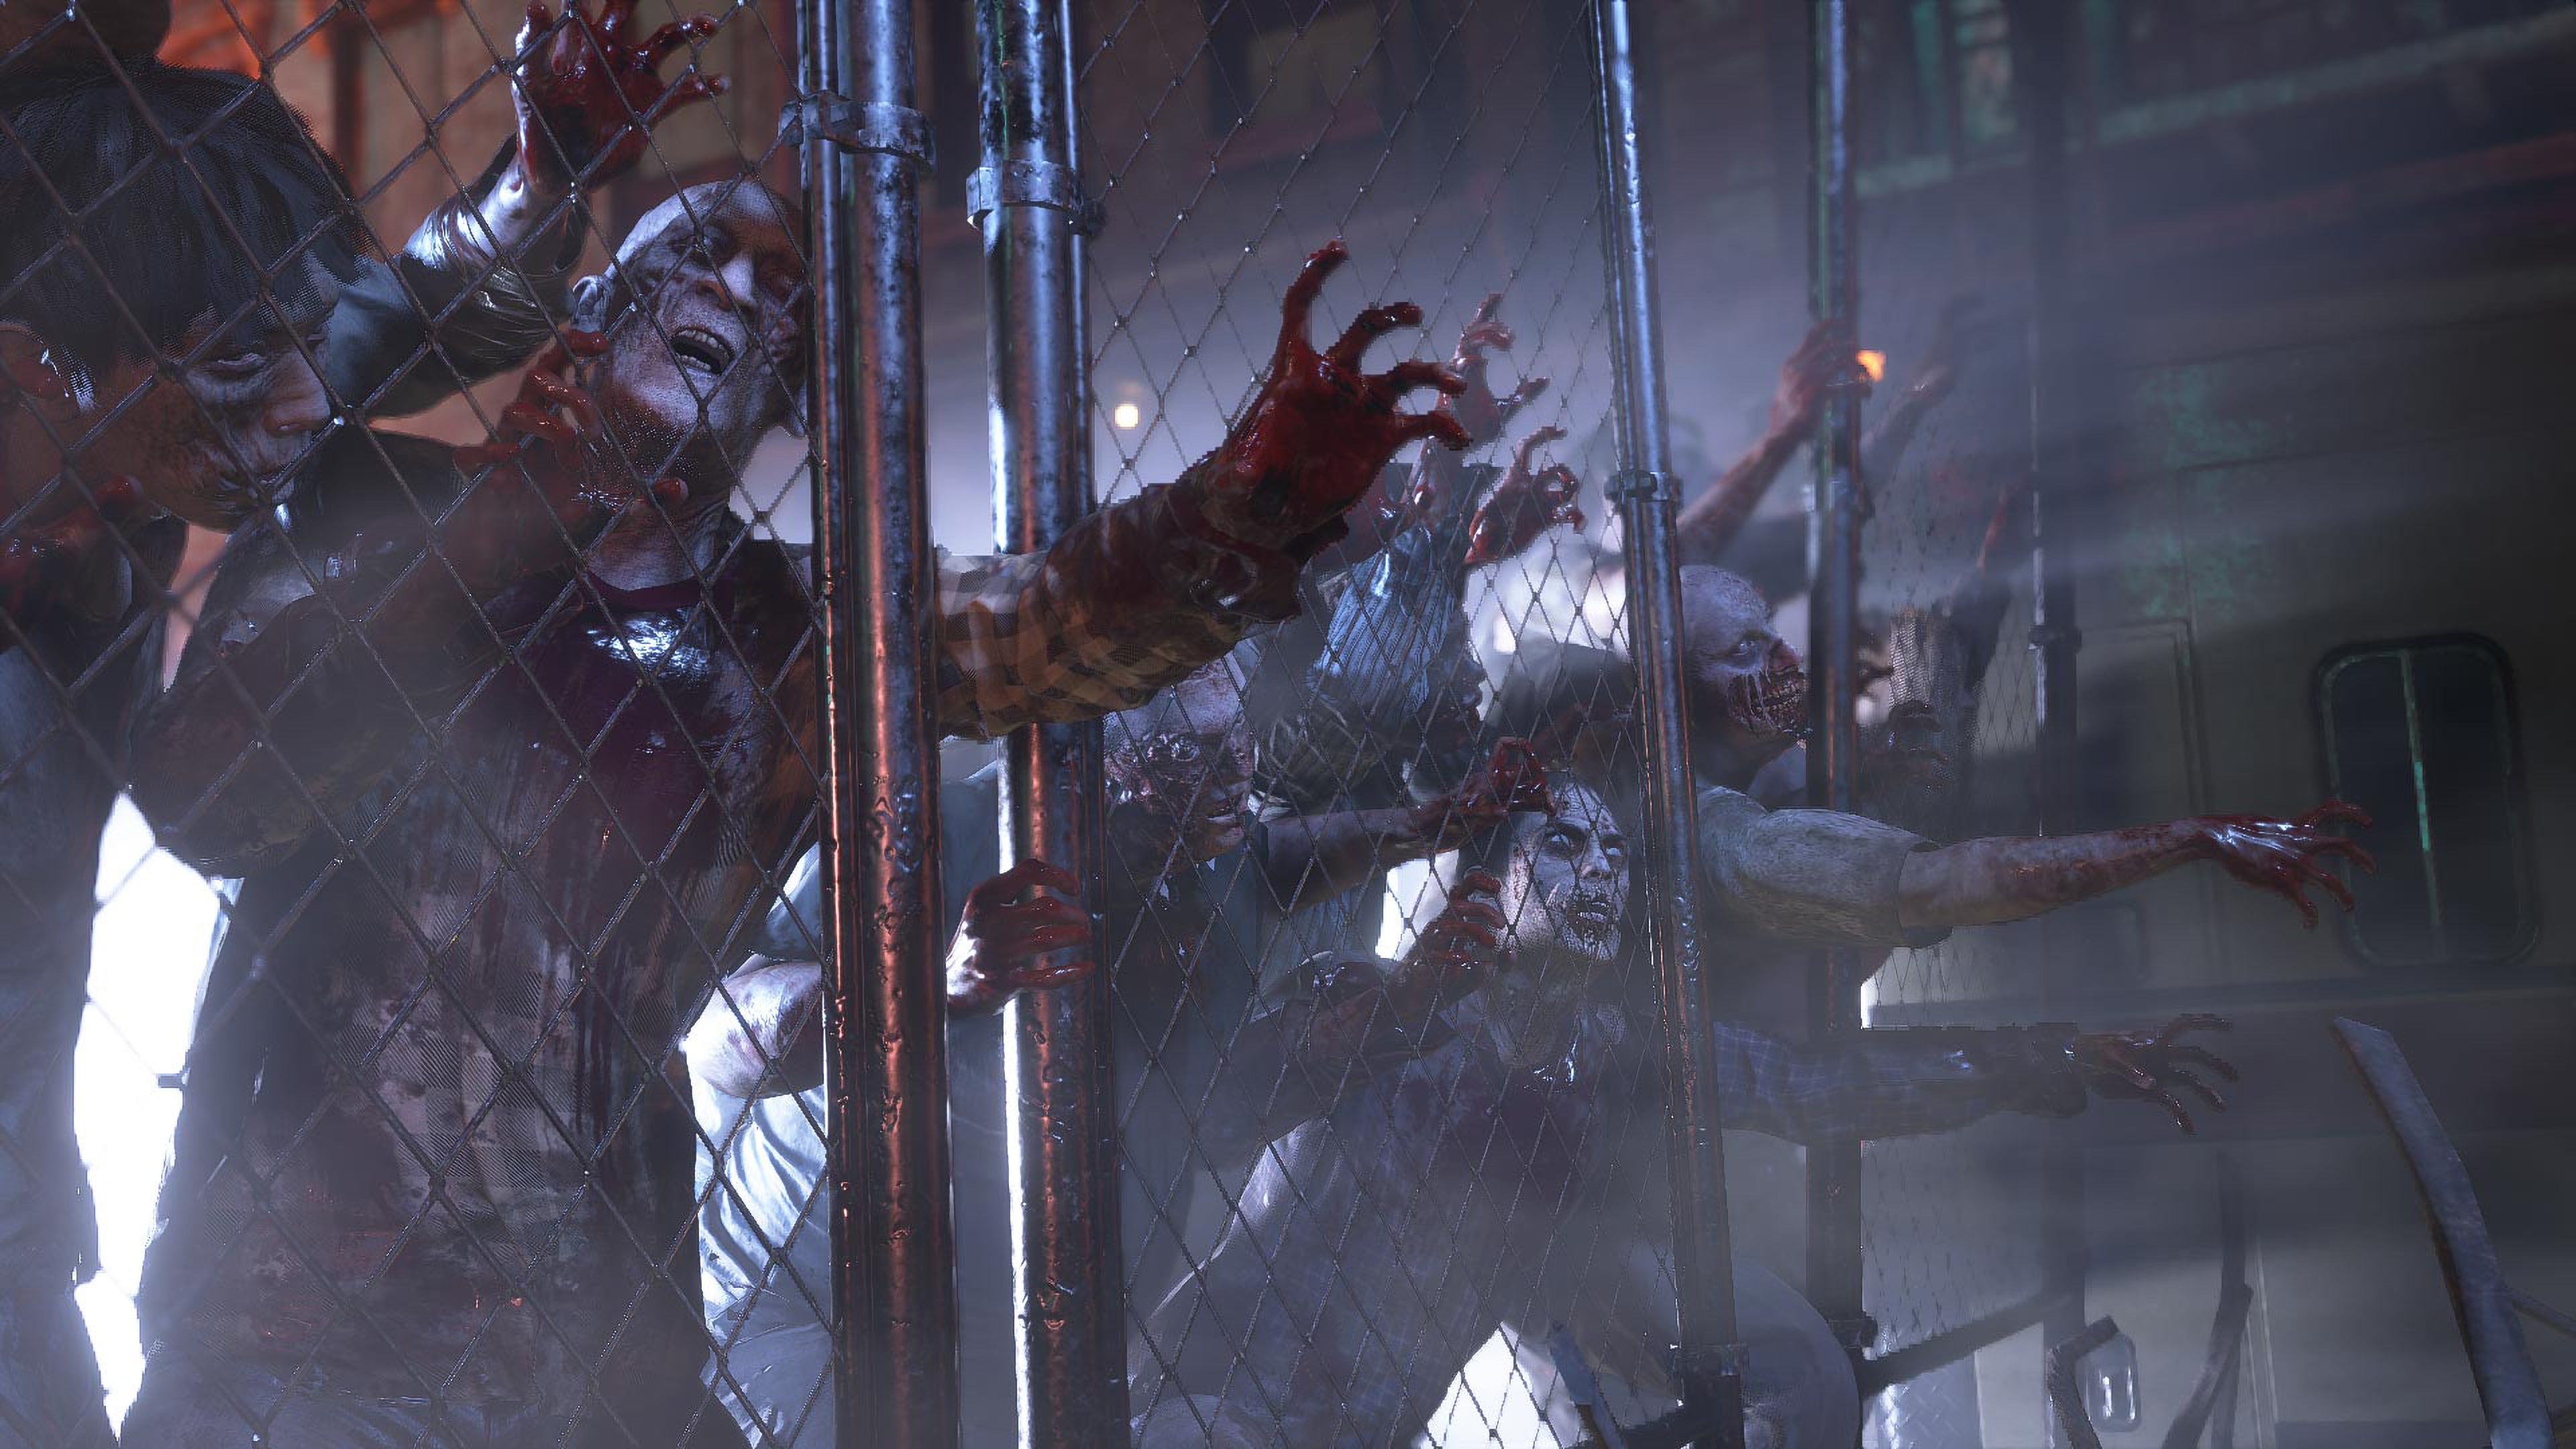 Resident Evil 3 Remake Demo Available Now for PS4/XO; Resistance Open Beta  Up for Preload at 10GB